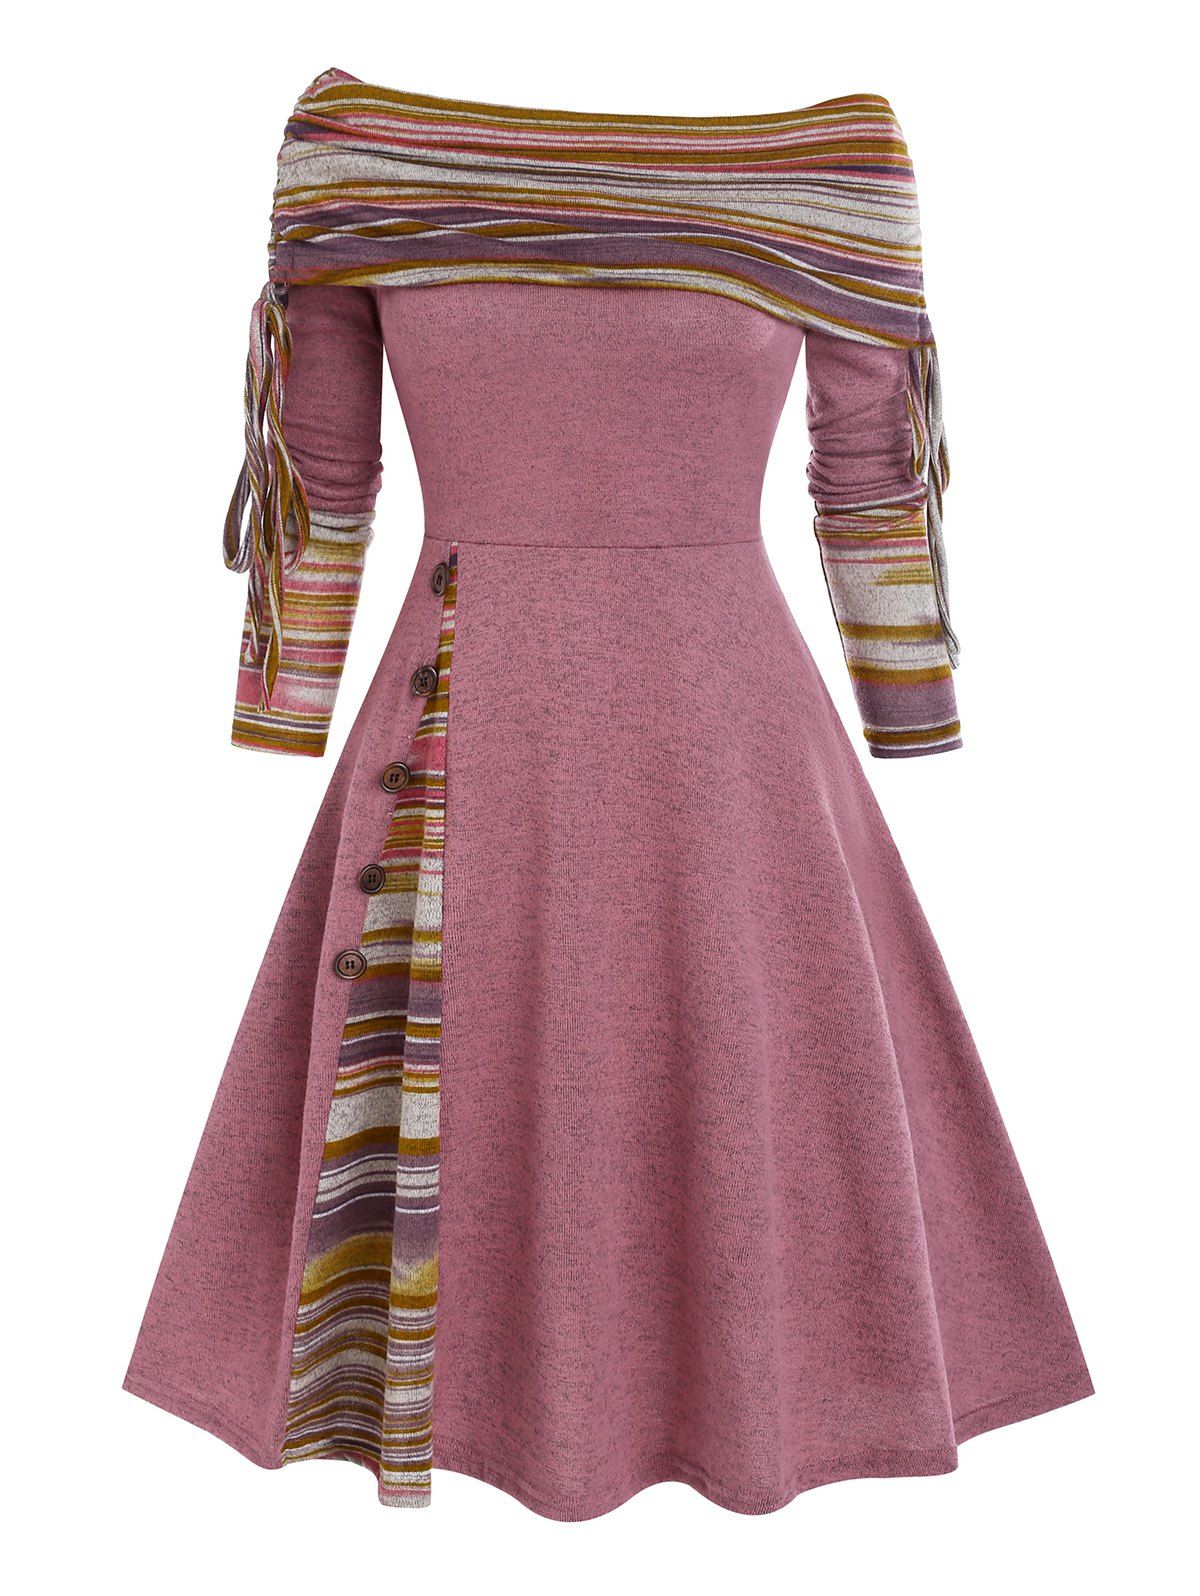 Convertible Neck Cinched Striped Flare Dress - LIGHT PINK M